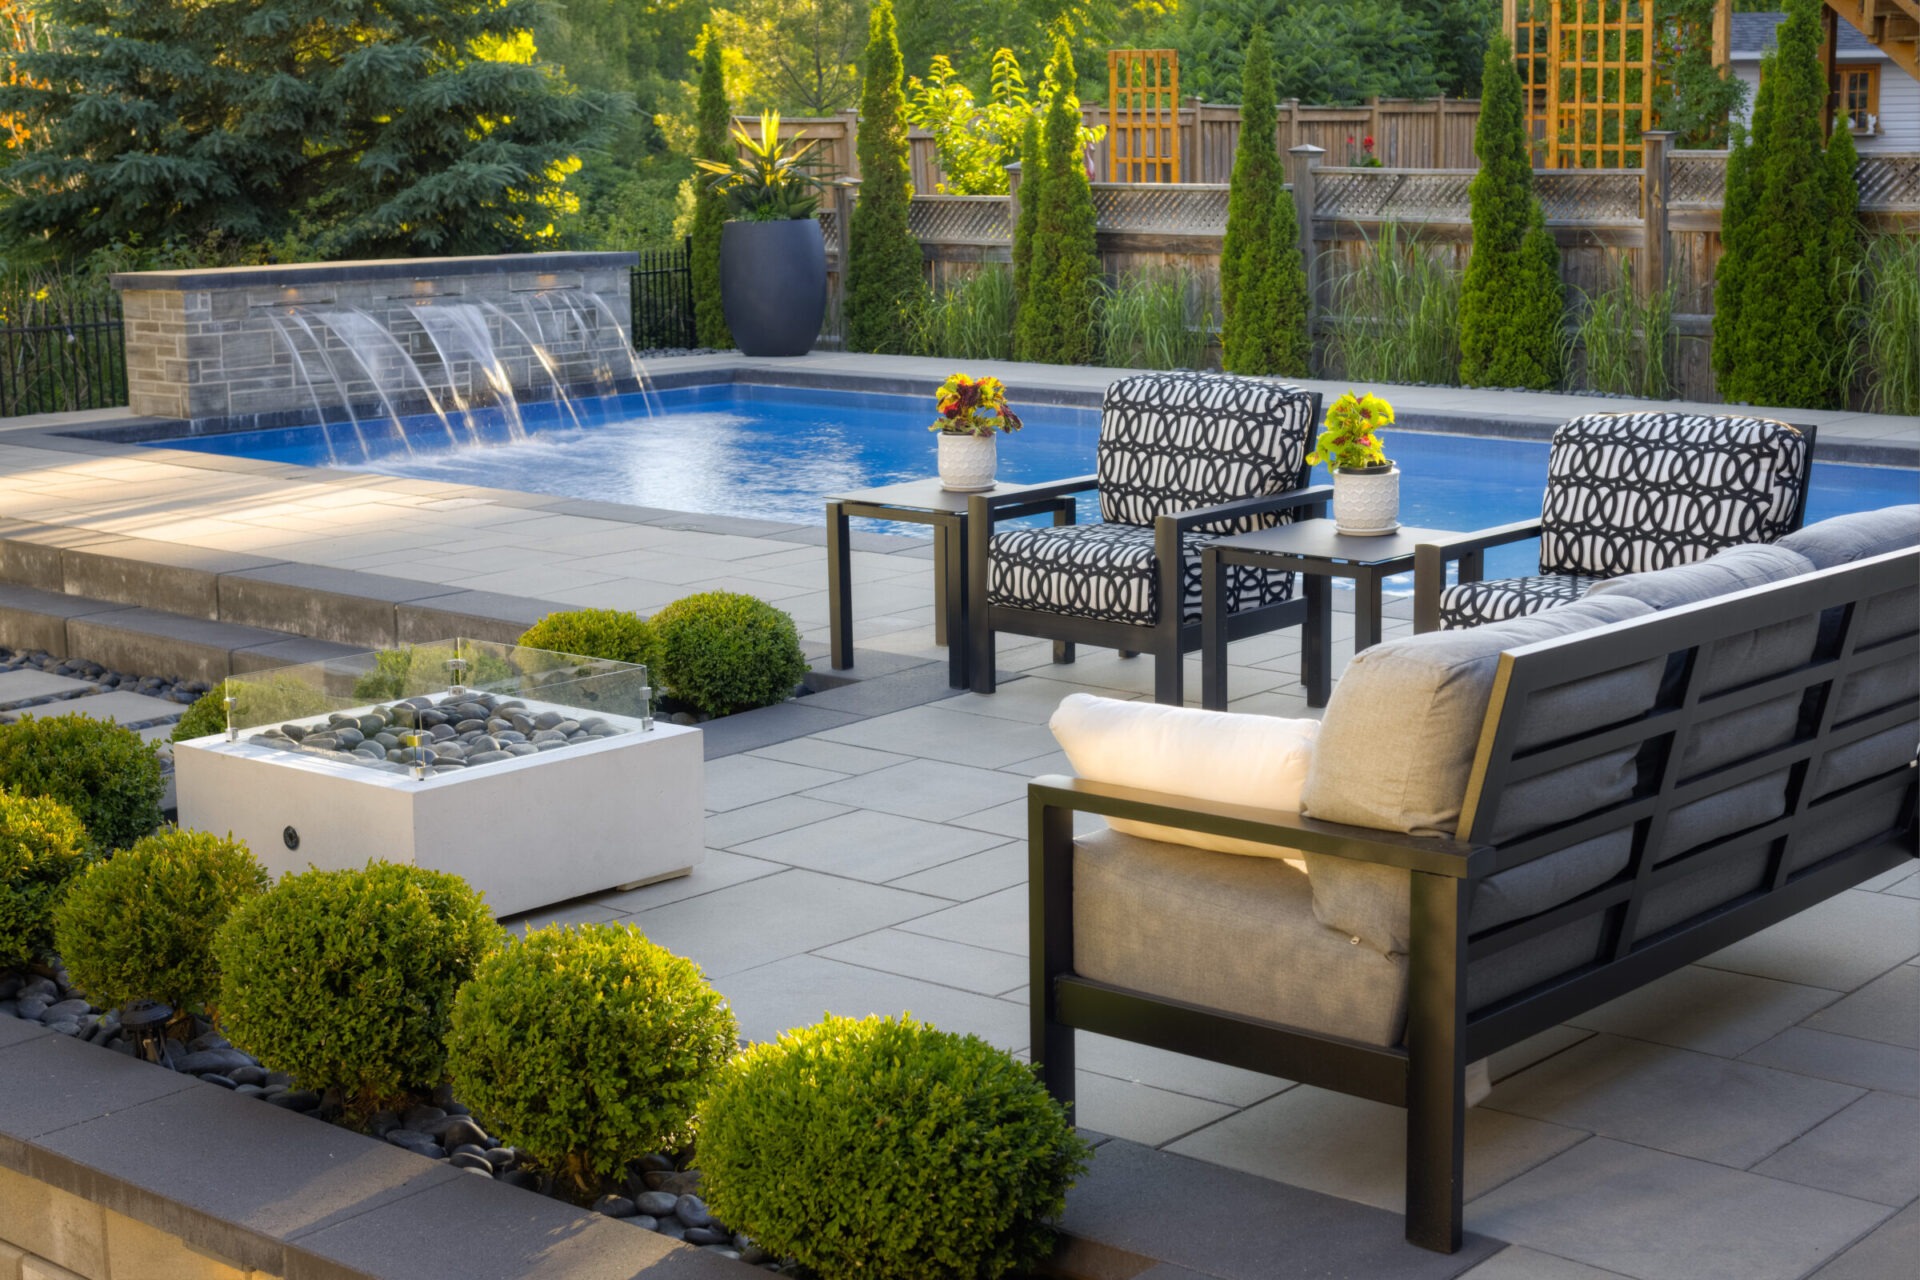 An elegant outdoor patio with a swimming pool featuring waterfalls, surrounded by lush plants, modern furniture, and a fire feature for ambiance.